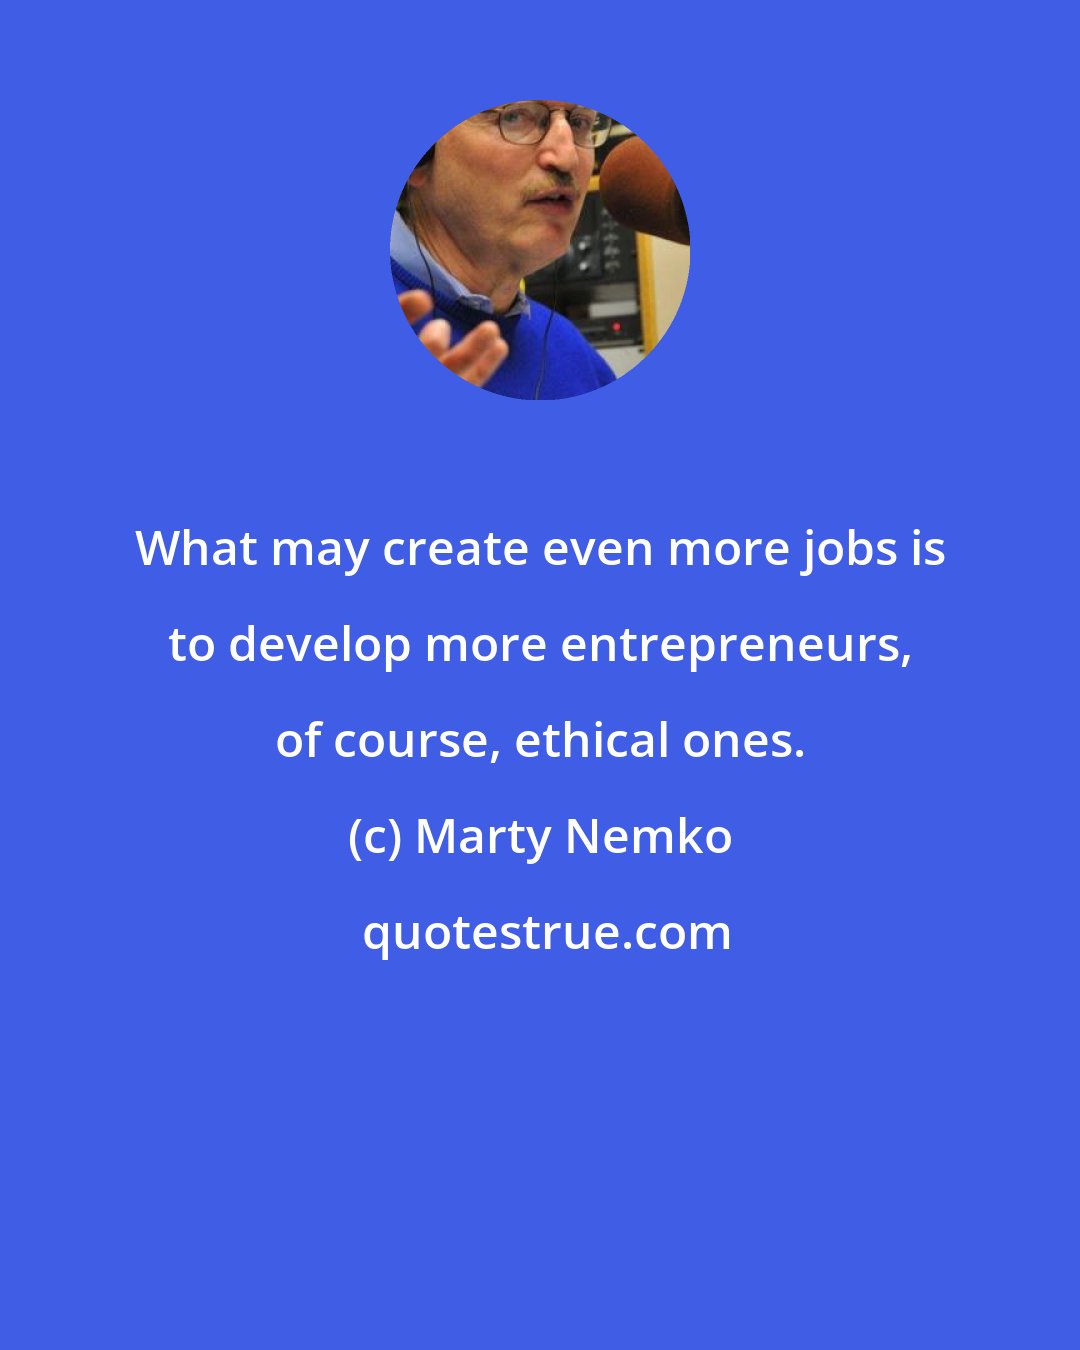 Marty Nemko: What may create even more jobs is to develop more entrepreneurs, of course, ethical ones.